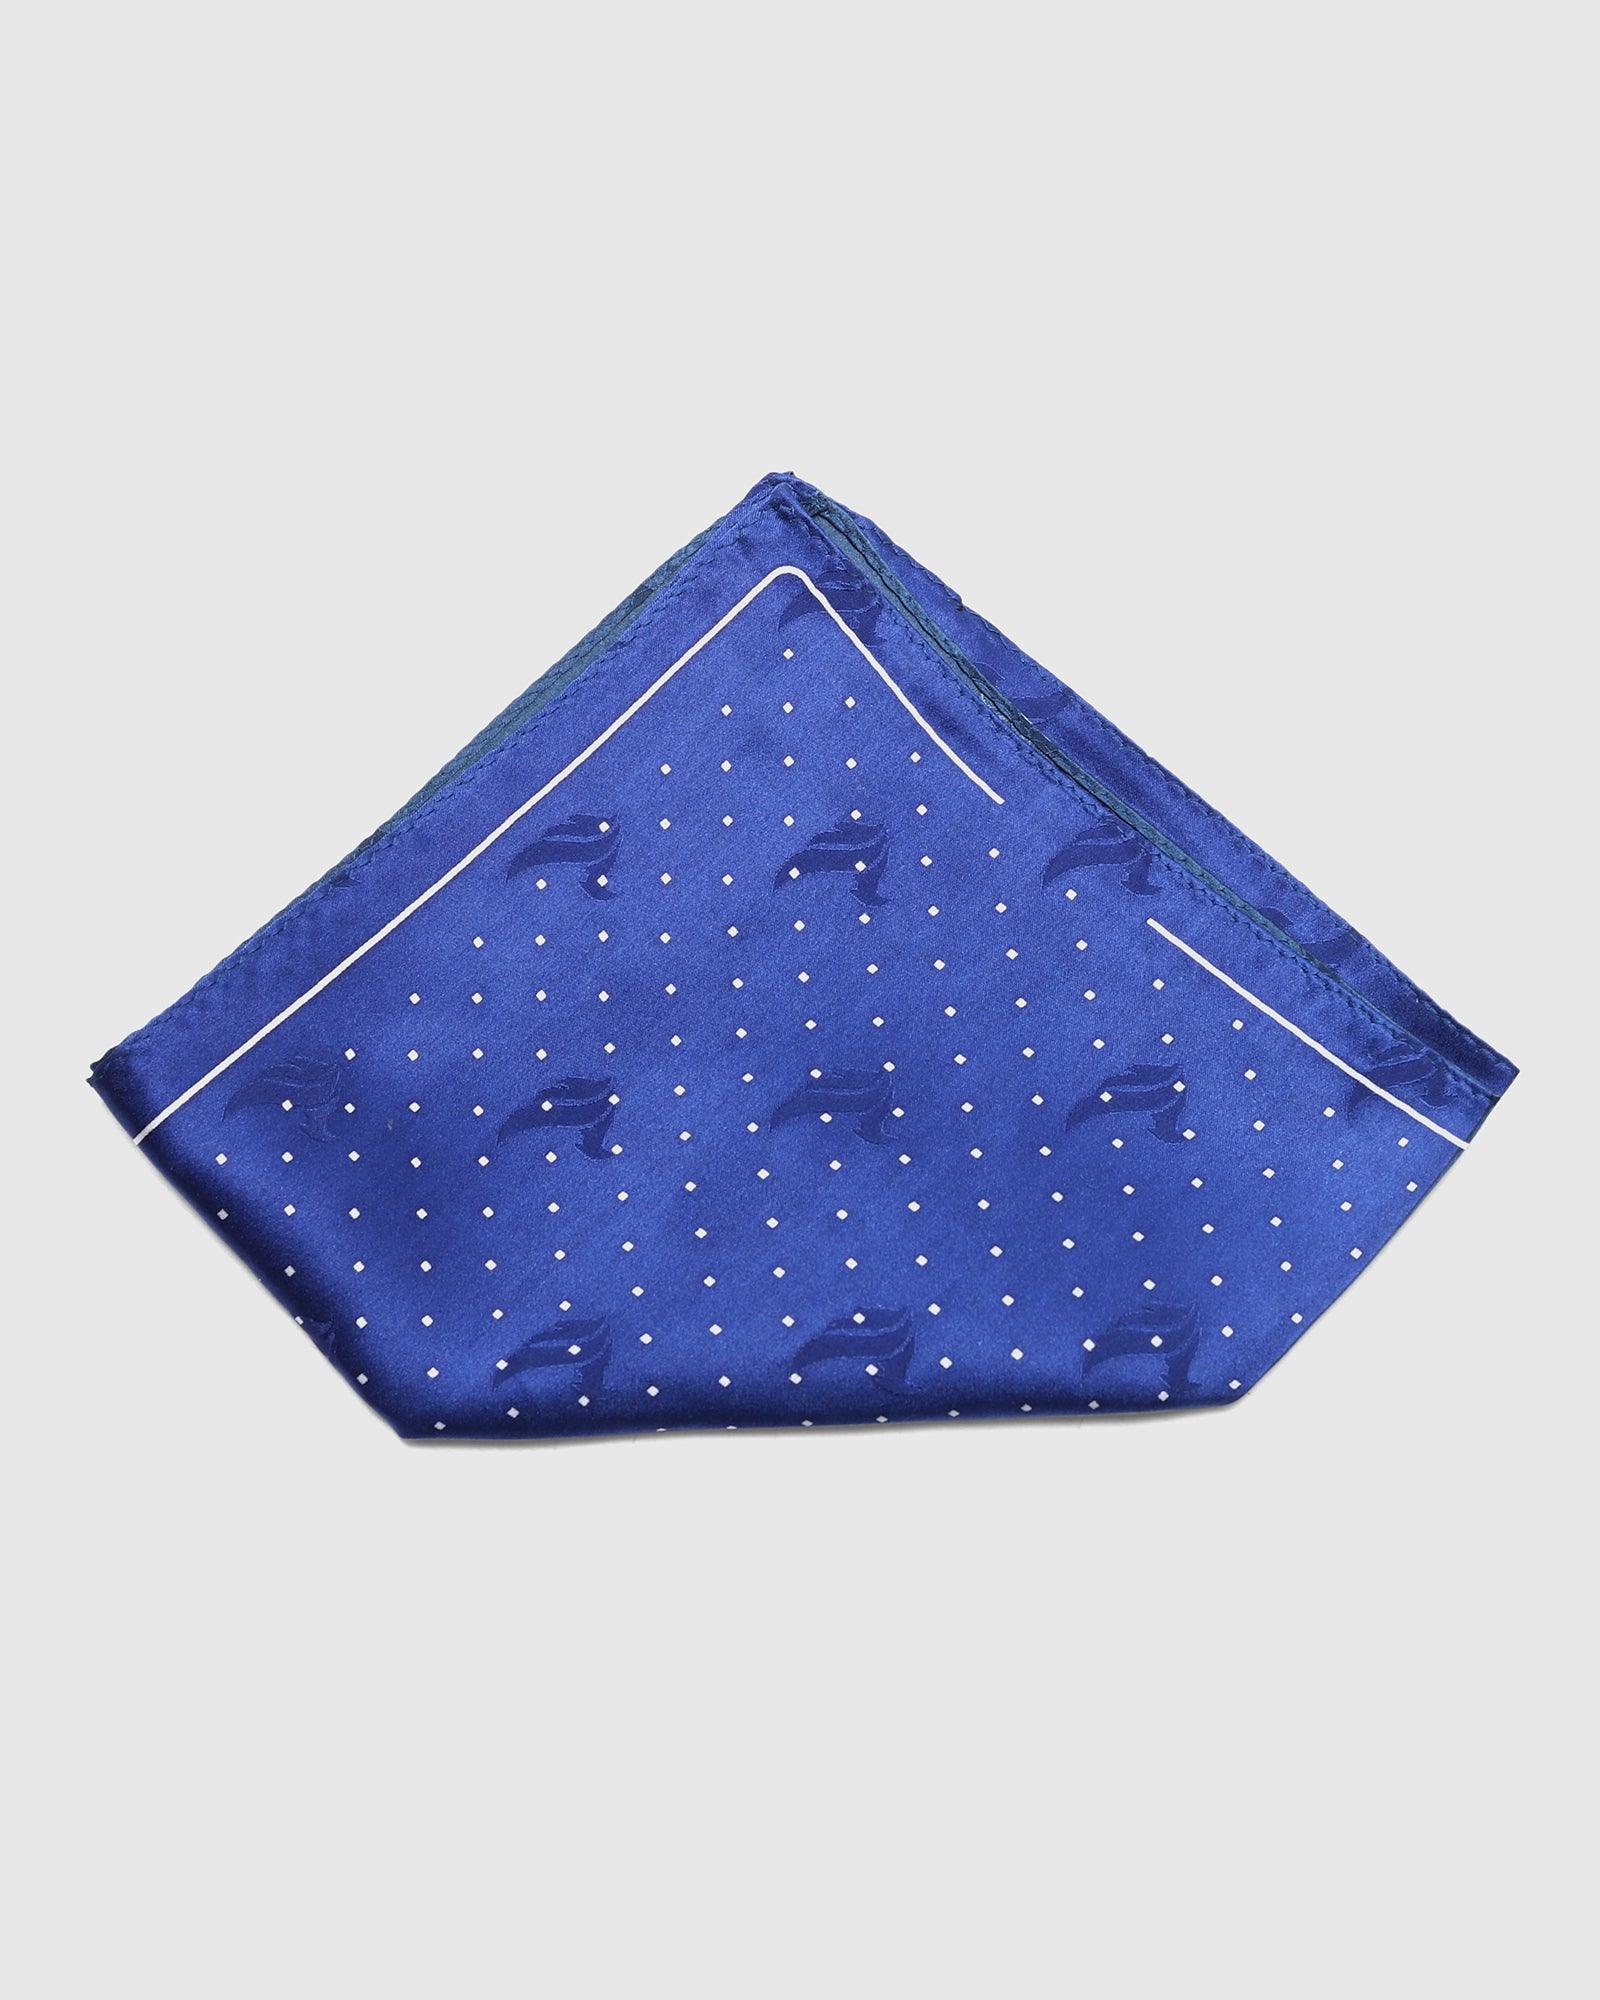 Boxed Combo Check Tie With Pocket Square And Cufflink - Seem